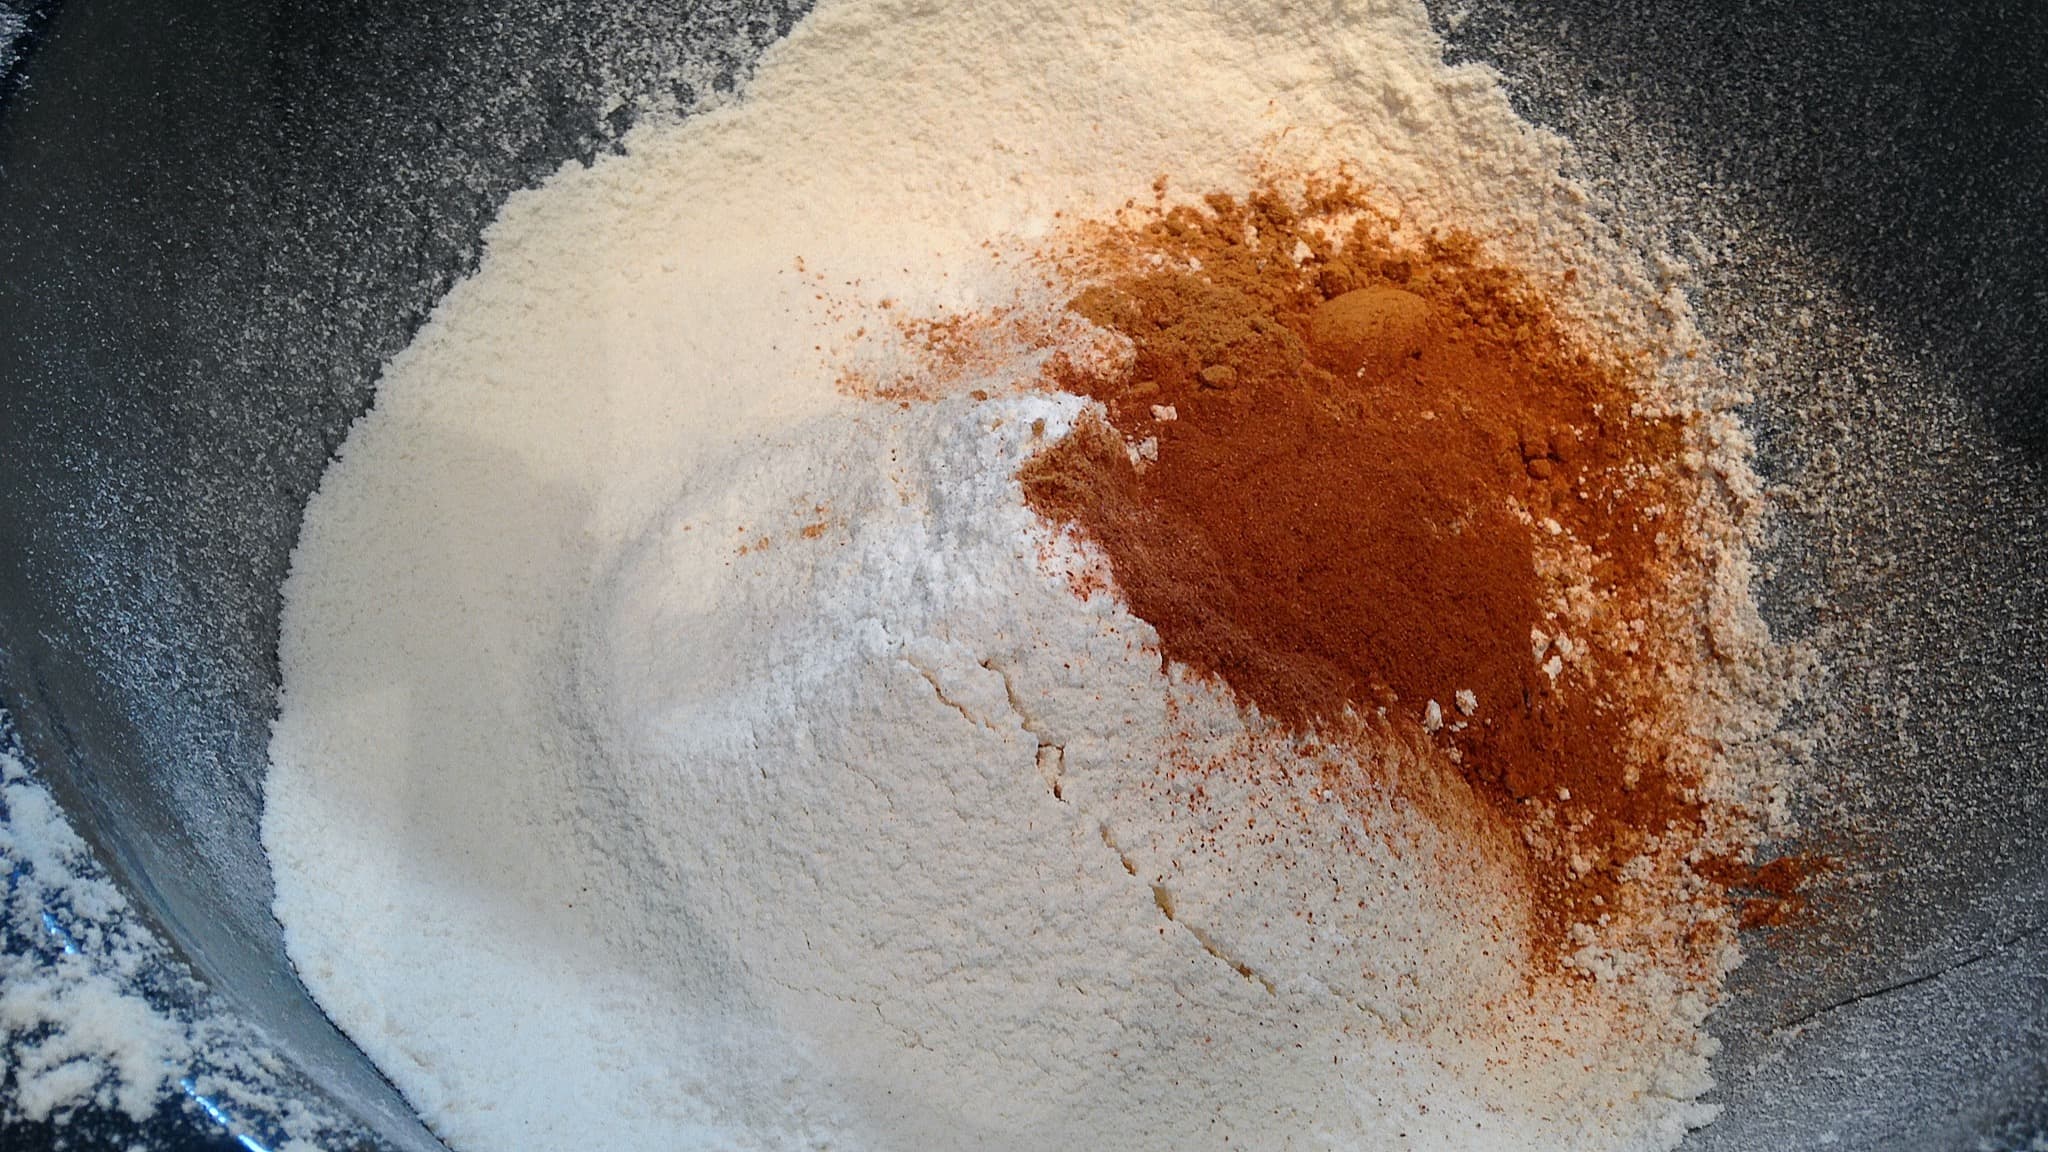 Mixing the dry ingredients together when making Christmas gingerbread